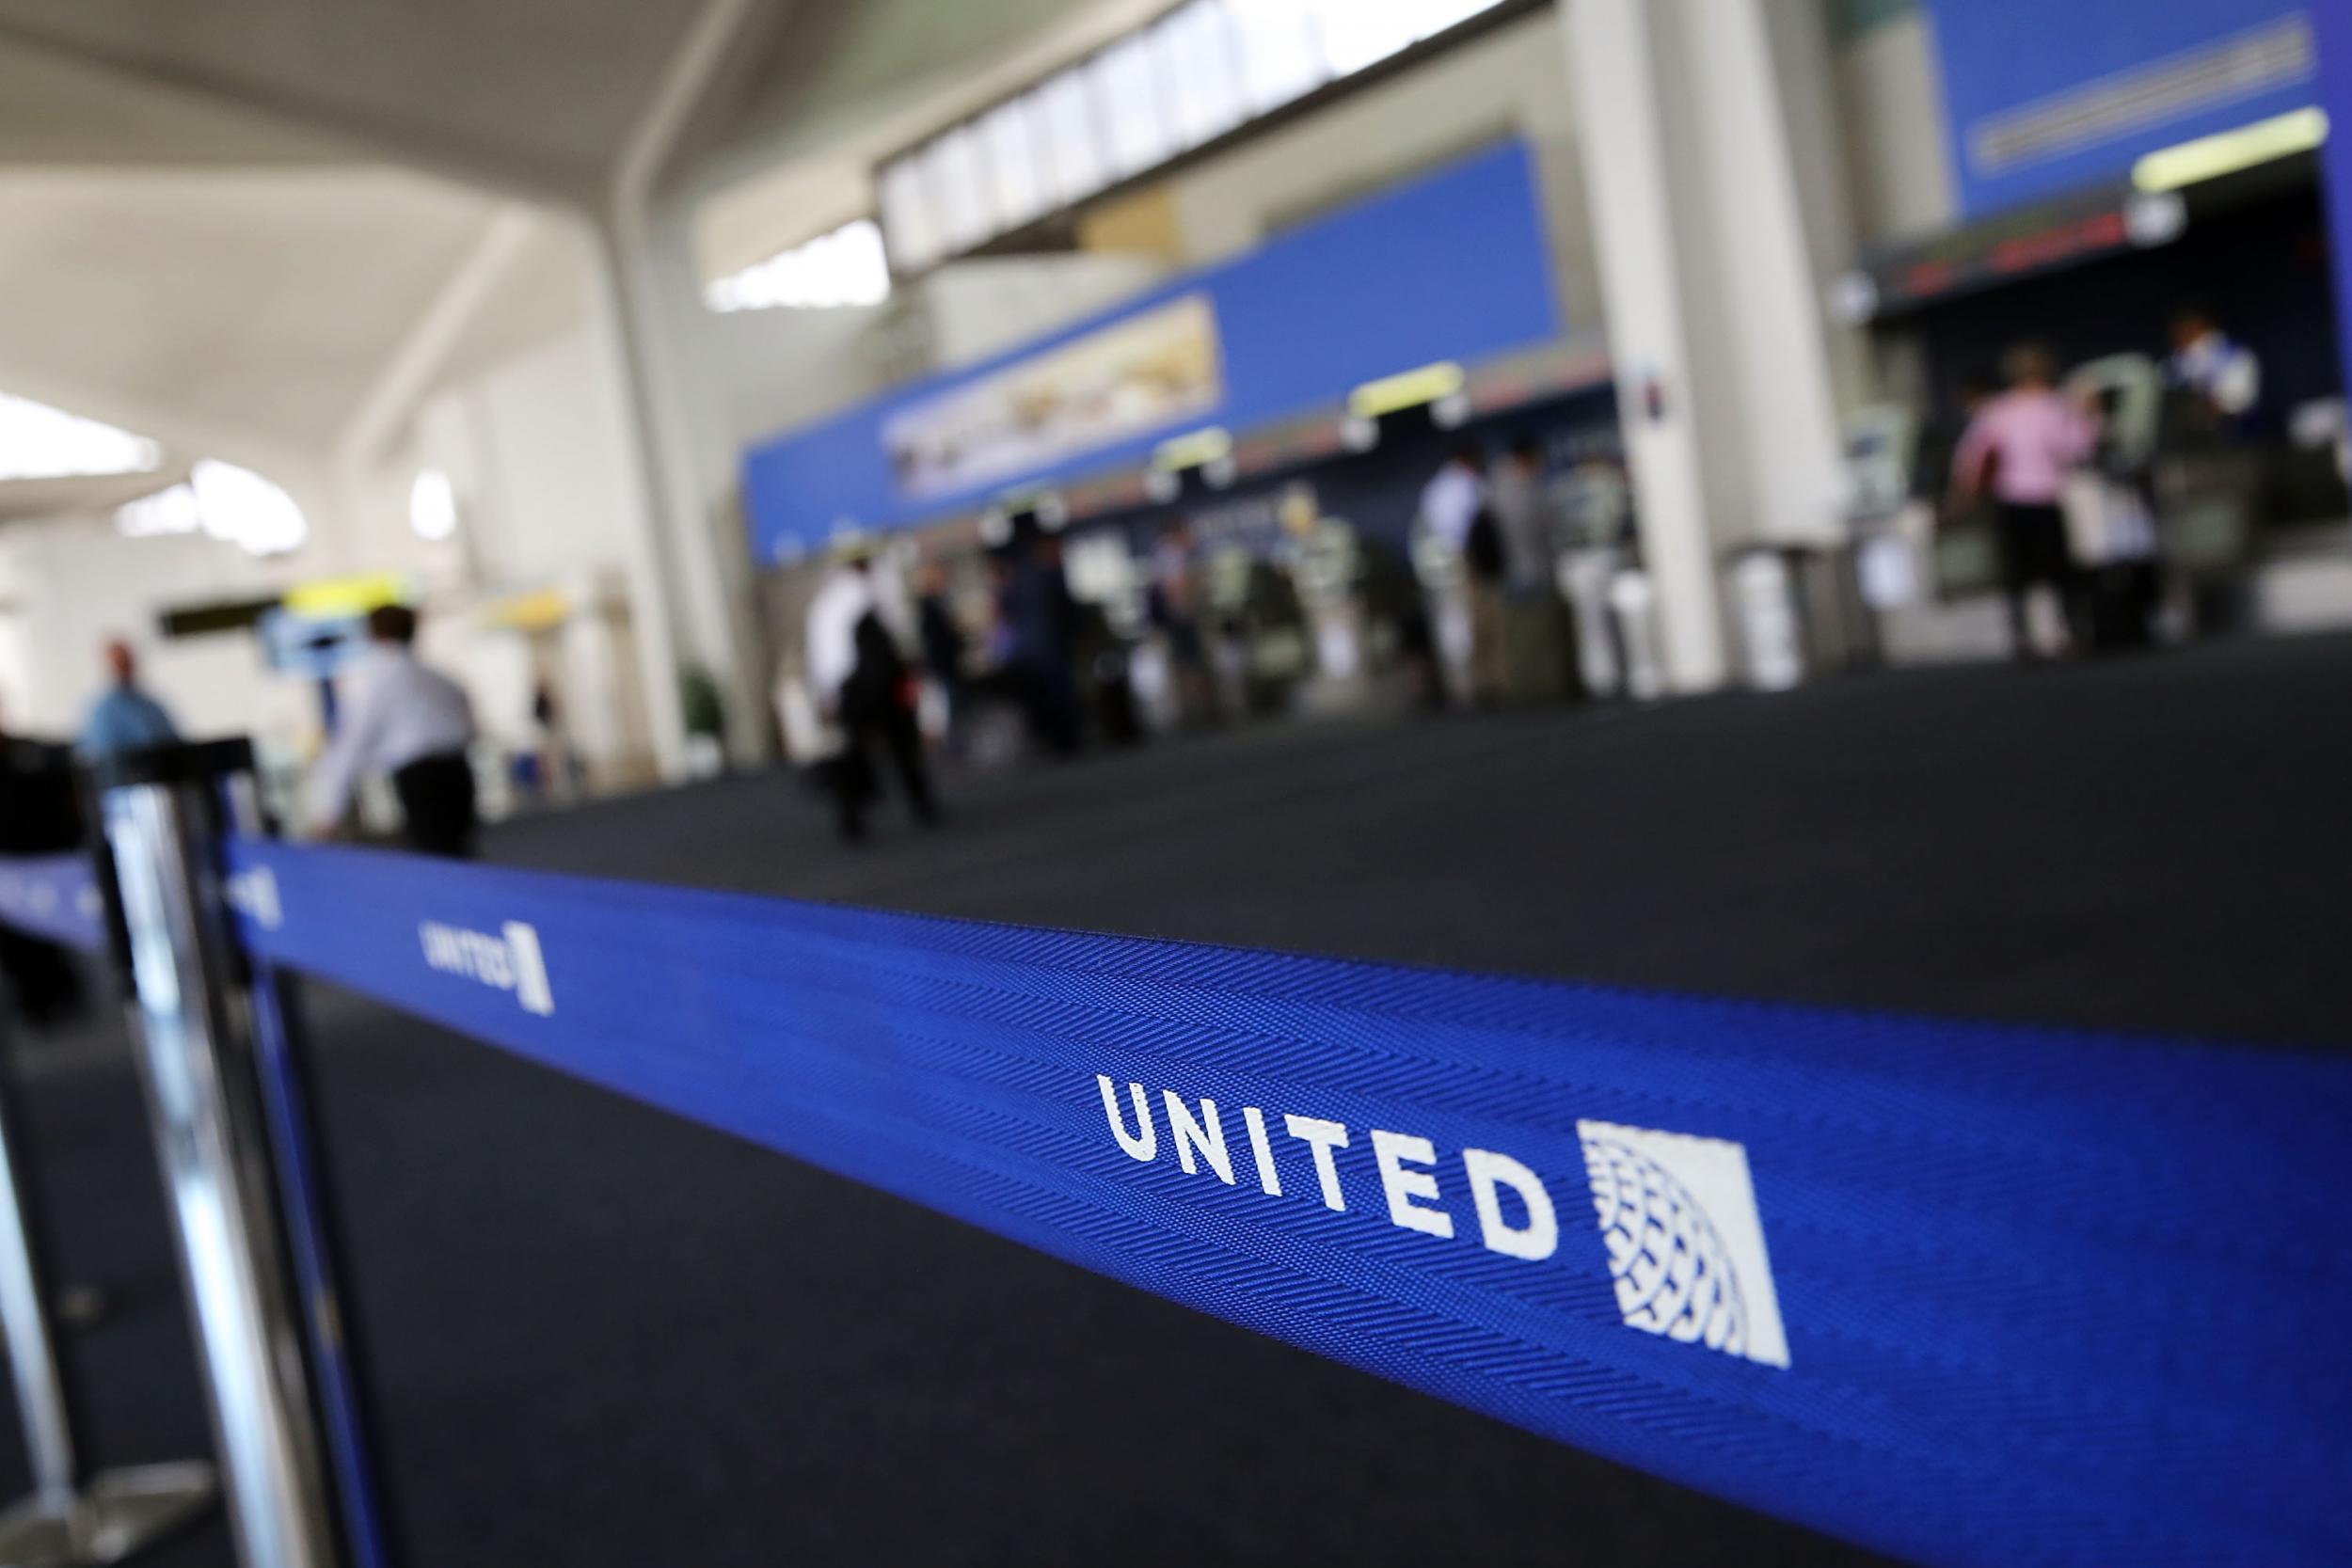 United Airlines' latest public relations debacle is sending a rapper's dog to the wrong city